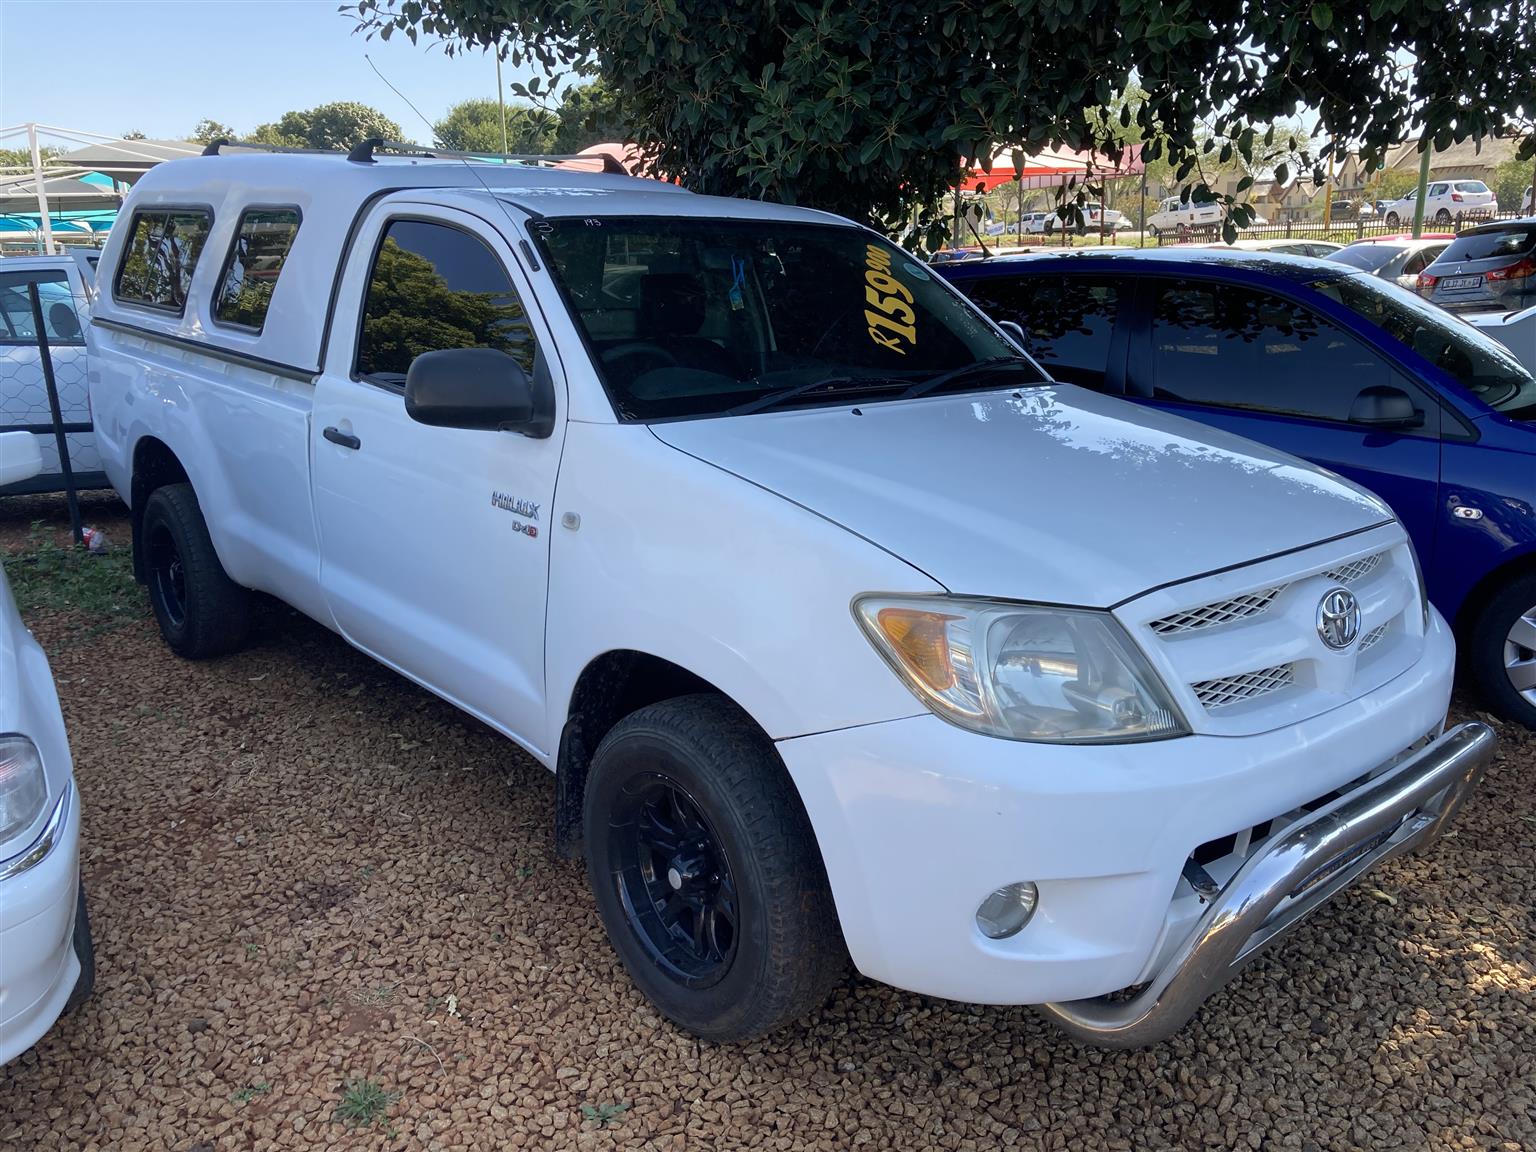 2007 Totota Hilux 2.5d4d lwb with canopy